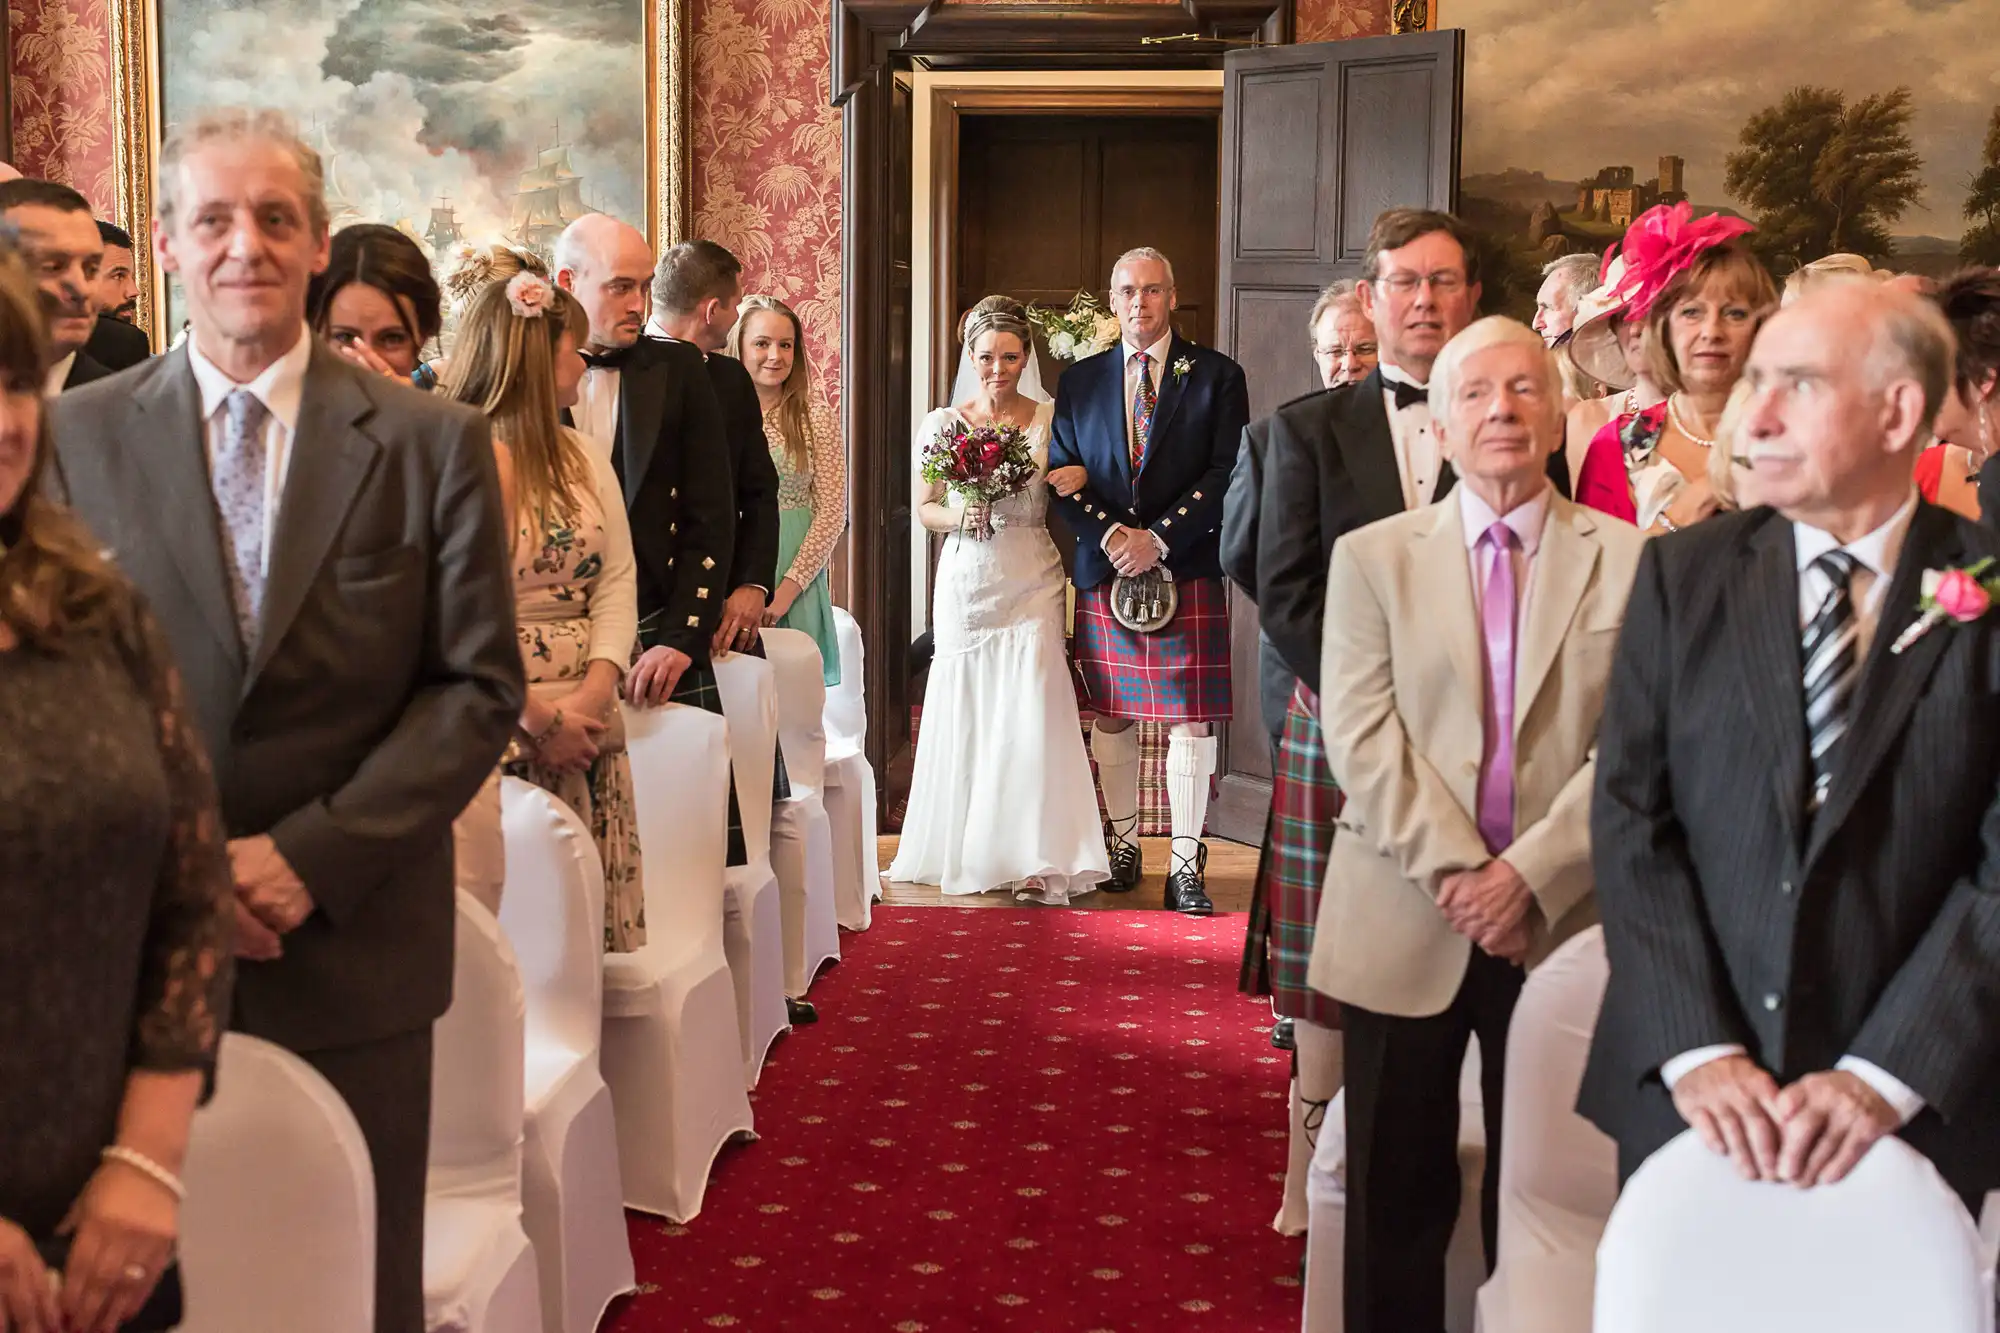 Bride walking down the aisle with her father who wears a kilt, in a room with guests on either side and historical paintings on the walls.